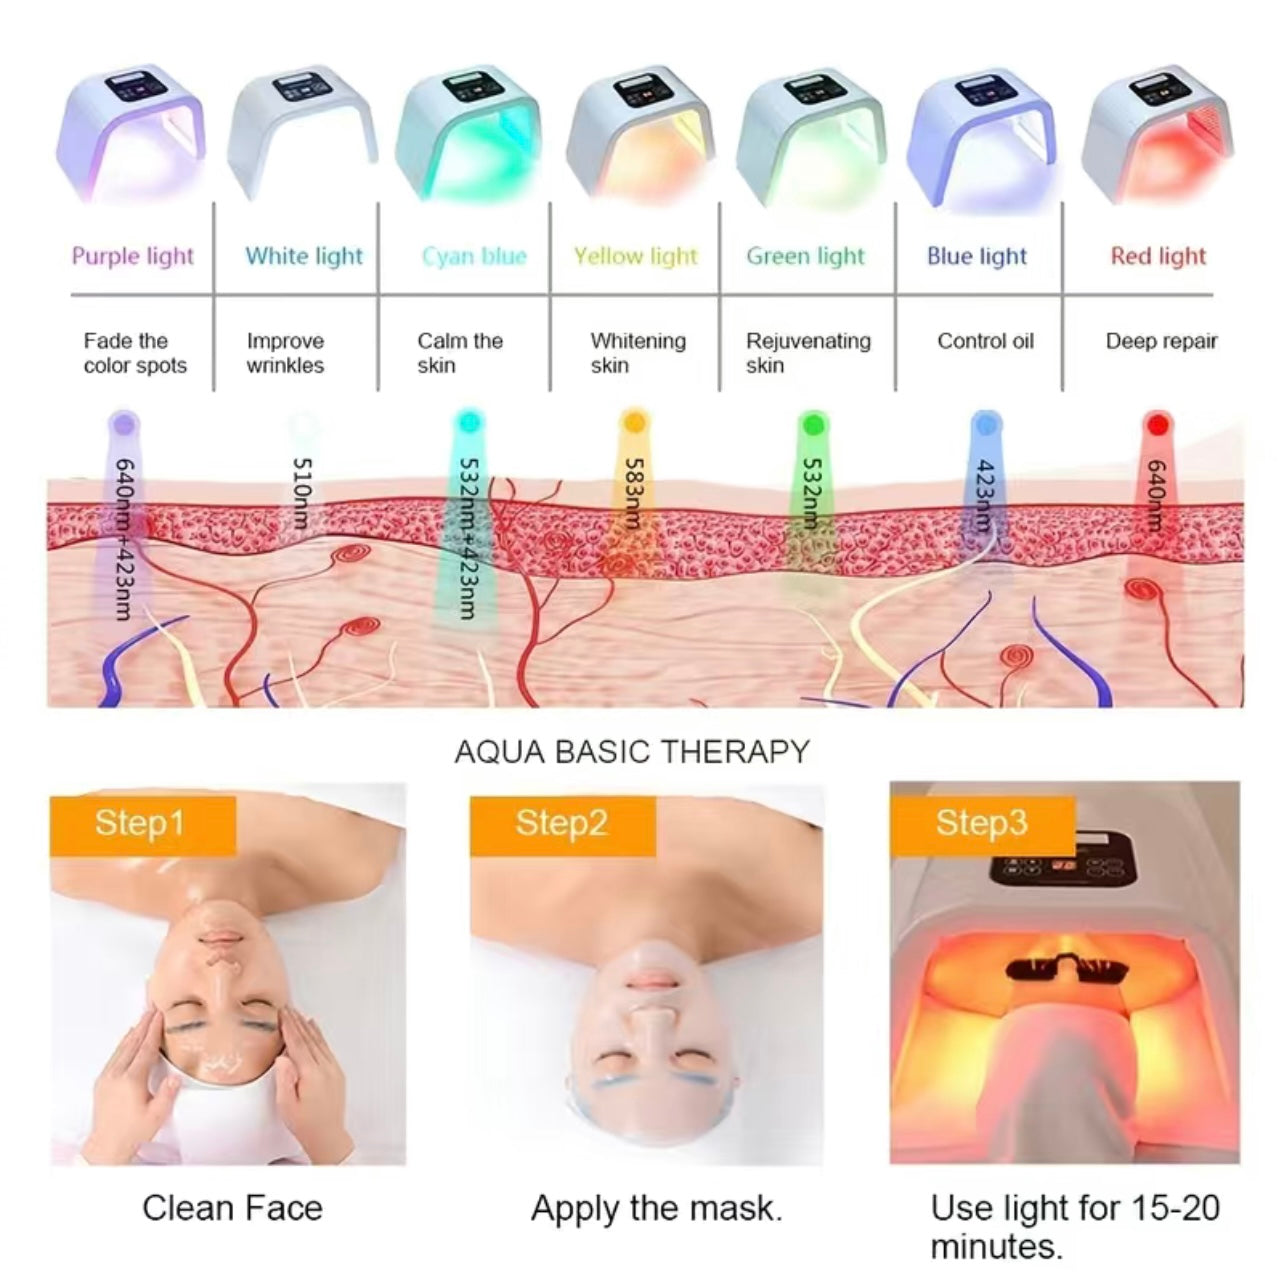 7 color LED light facial lamp. Skincare, wrinkles correct, best facial products, skin tightening, tiktok made me buy it. Tiktok viral products, aesthetician recommended products, best skincare, body sculpting products at home, best at home skincare, red light therapy, increase collagen production, correct crows feet, wrinkle repair, best acne treatment